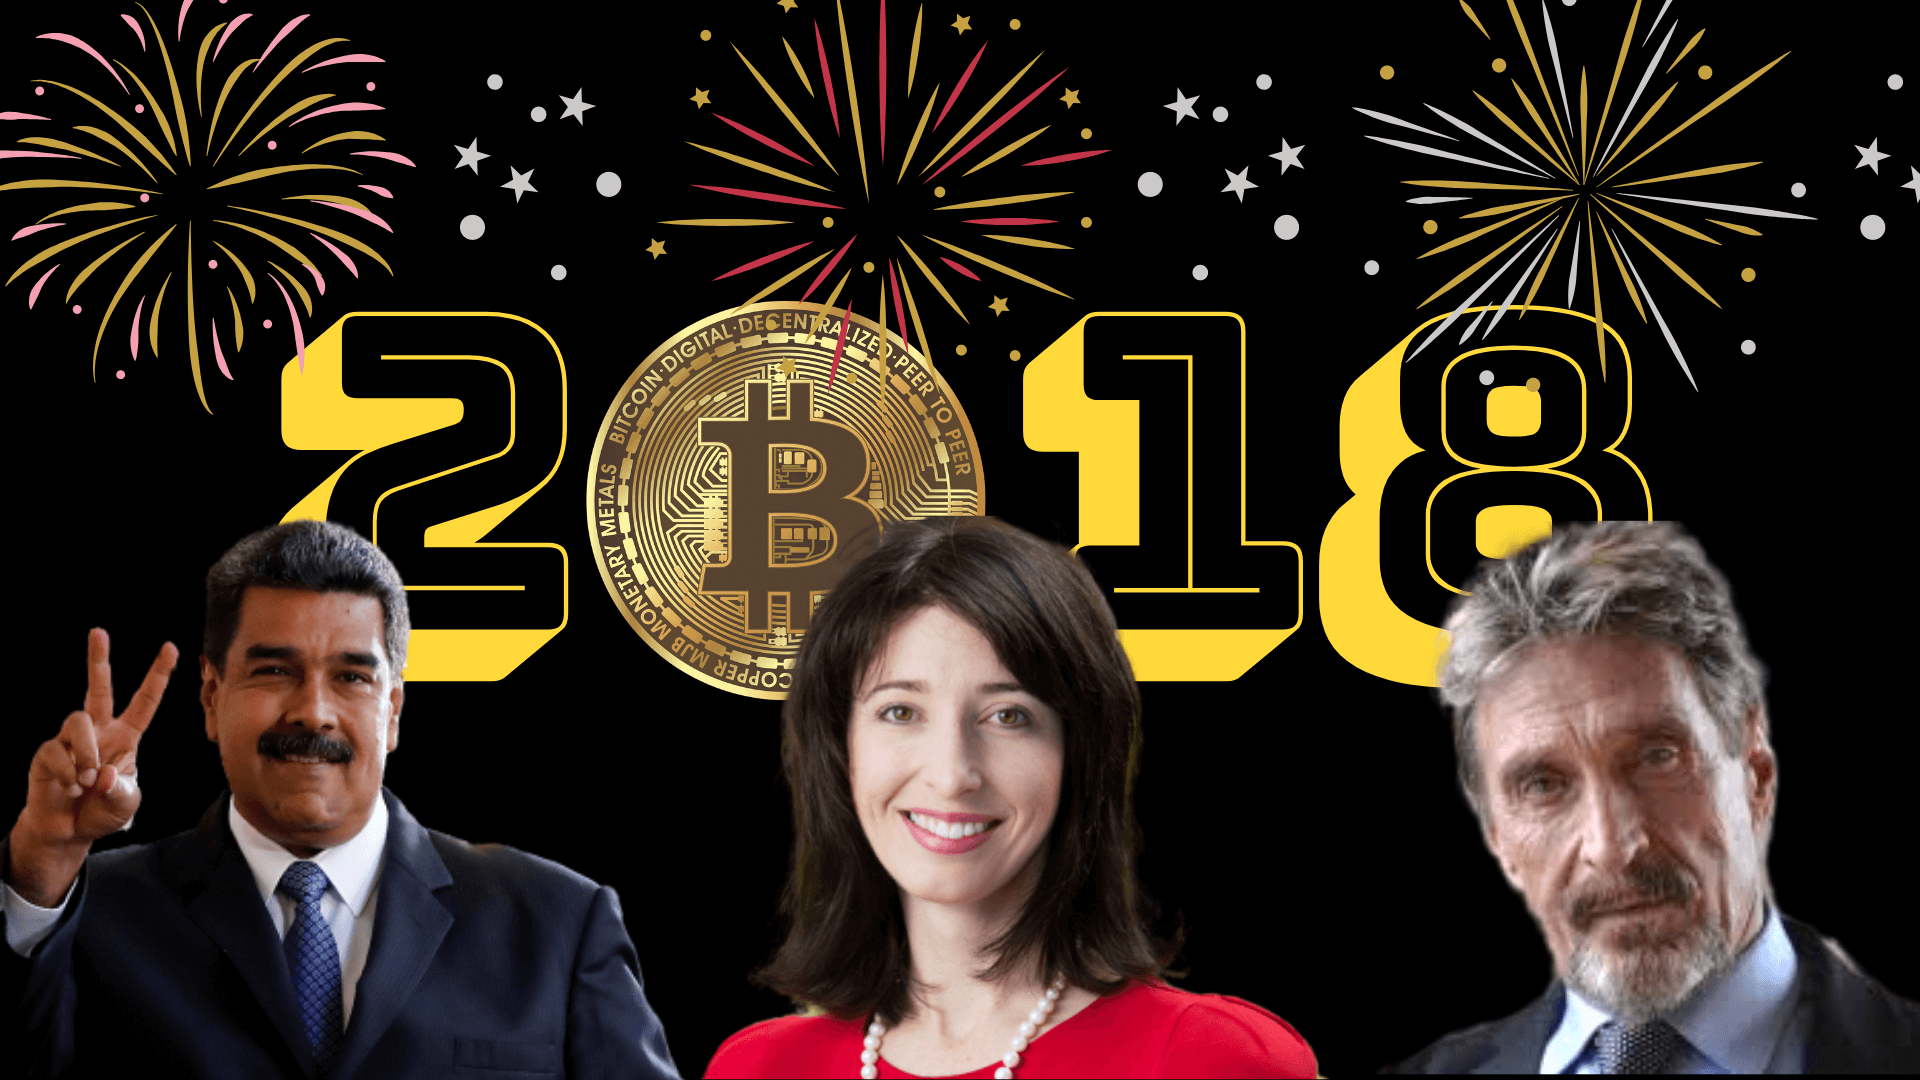 Jemma Green, President Nicolas Maduro and John McAfee in front of 2018 banner